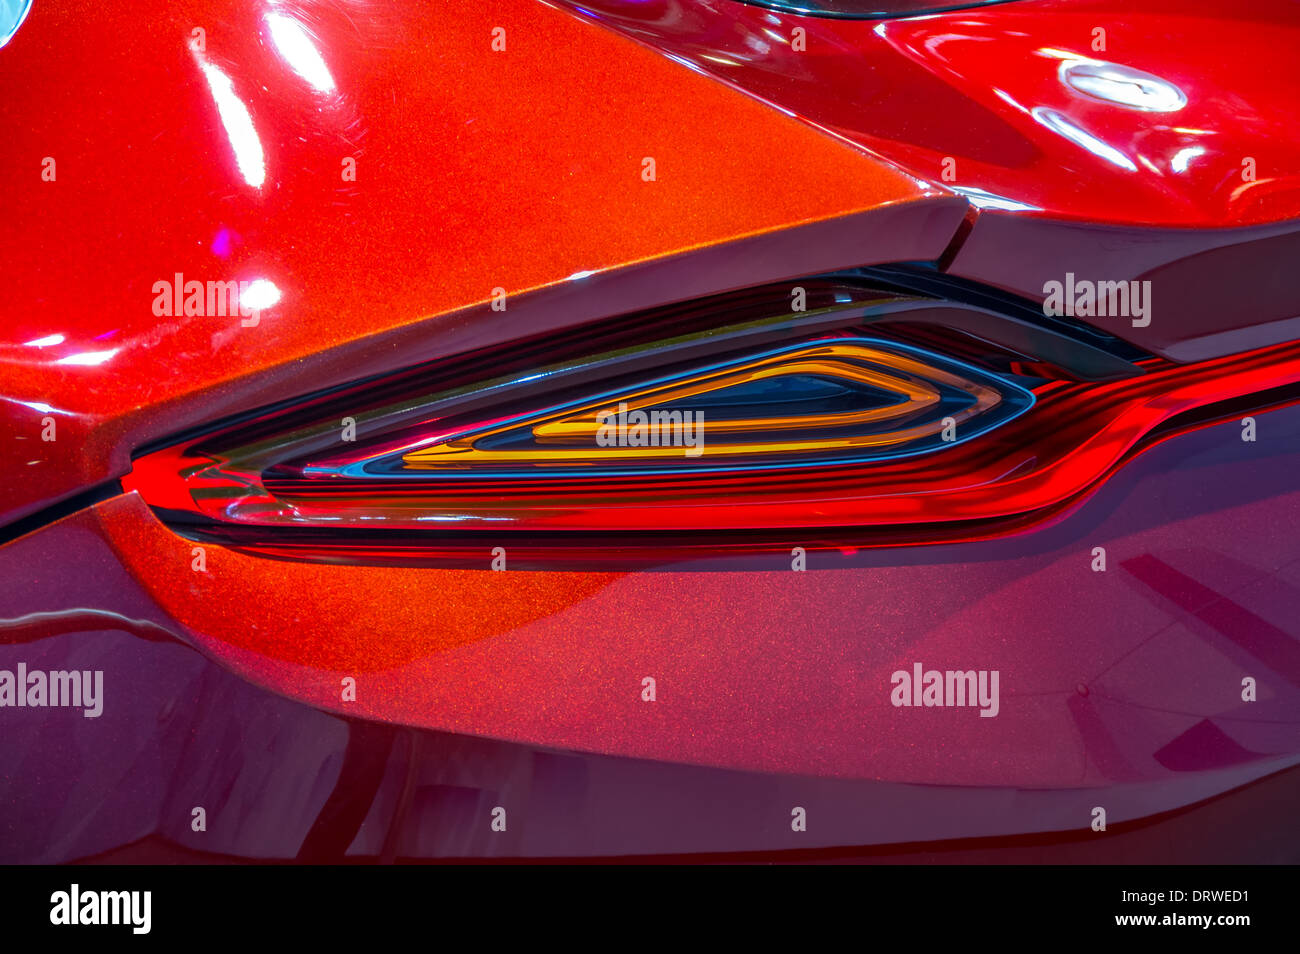 GENEVA, SWITZERLAND - MARCH 12: The Ford Evos coupe concept on display at  82nd Geneva International Motor Show Stock Photo - Alamy